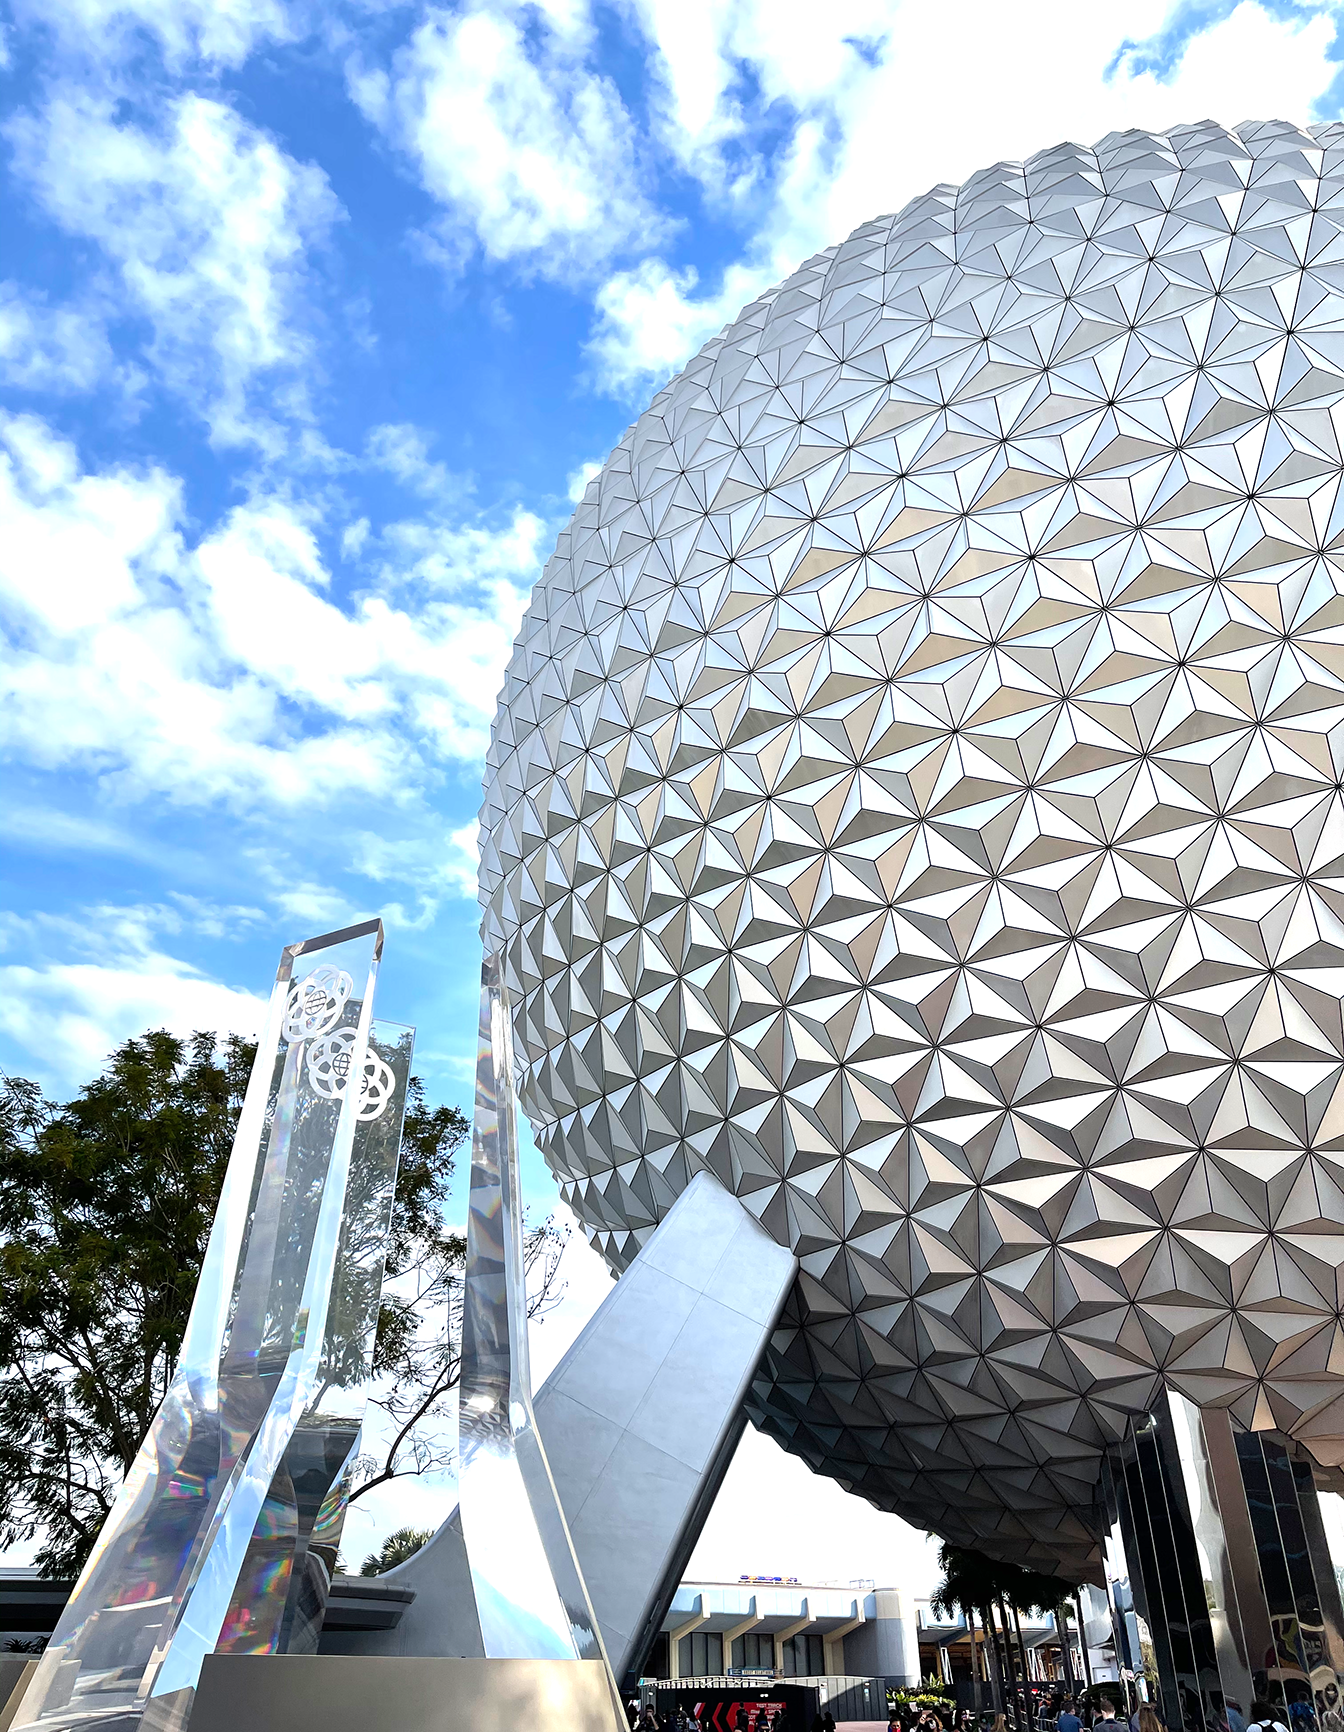 spaceship earth and glass sculpture at epcot in walt disney world